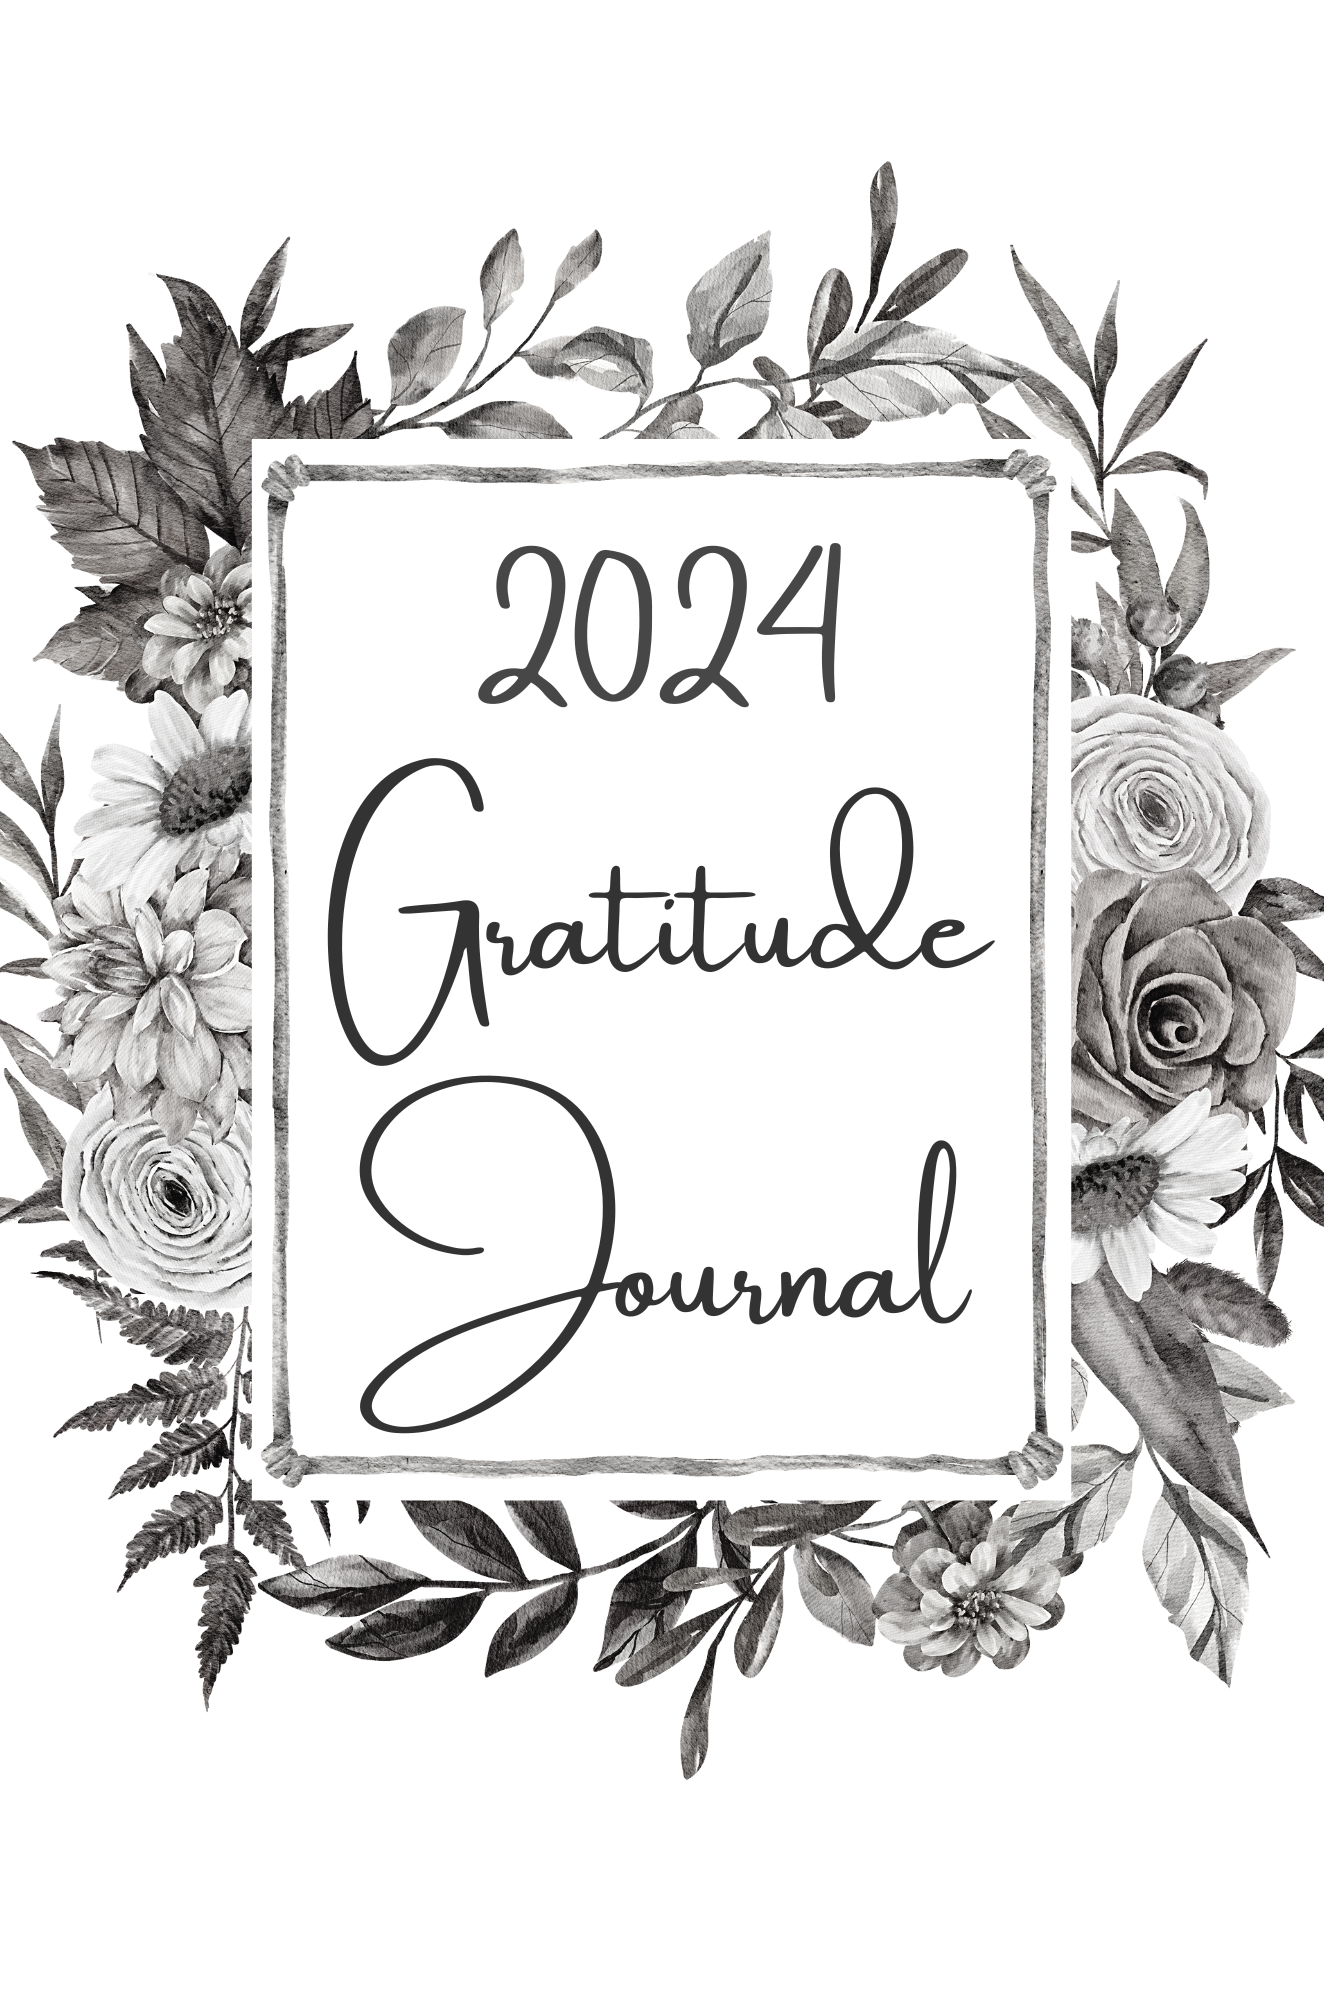 2024 Gratitude Journal - Inspirational Daily Gratitude Diary for a Positive Year